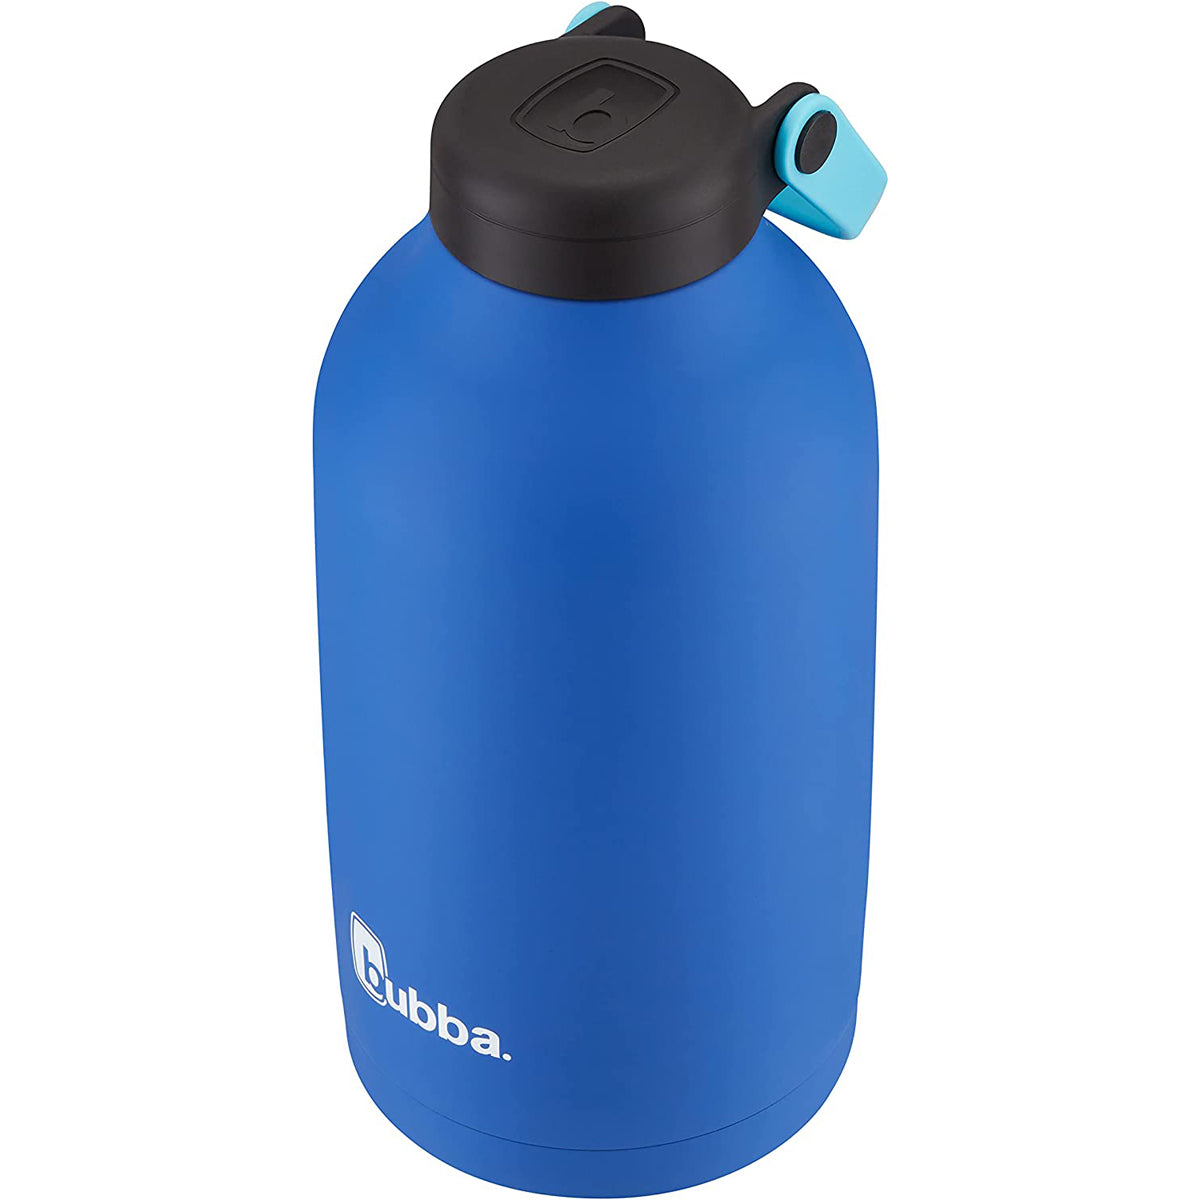 Bubba 64 oz. Radiant Insulated Stainless Steel Rubberized Growler - Cobalt Bubba